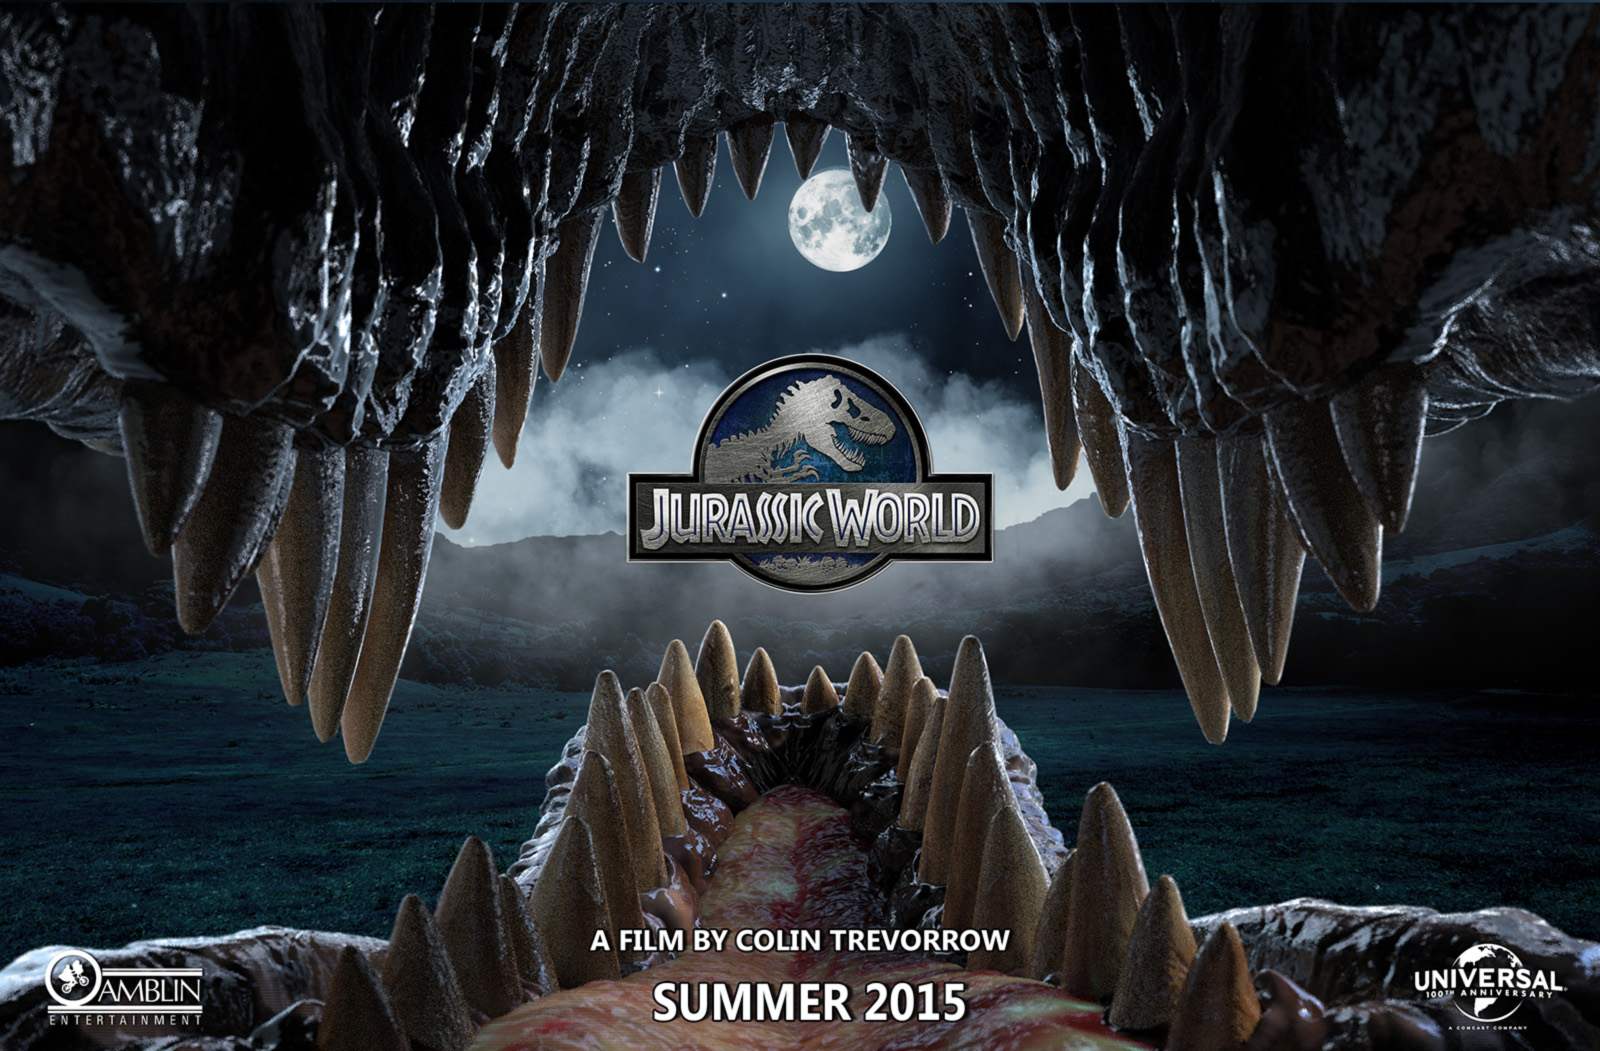 ‘jurassic world’ brochure reveals details from the film